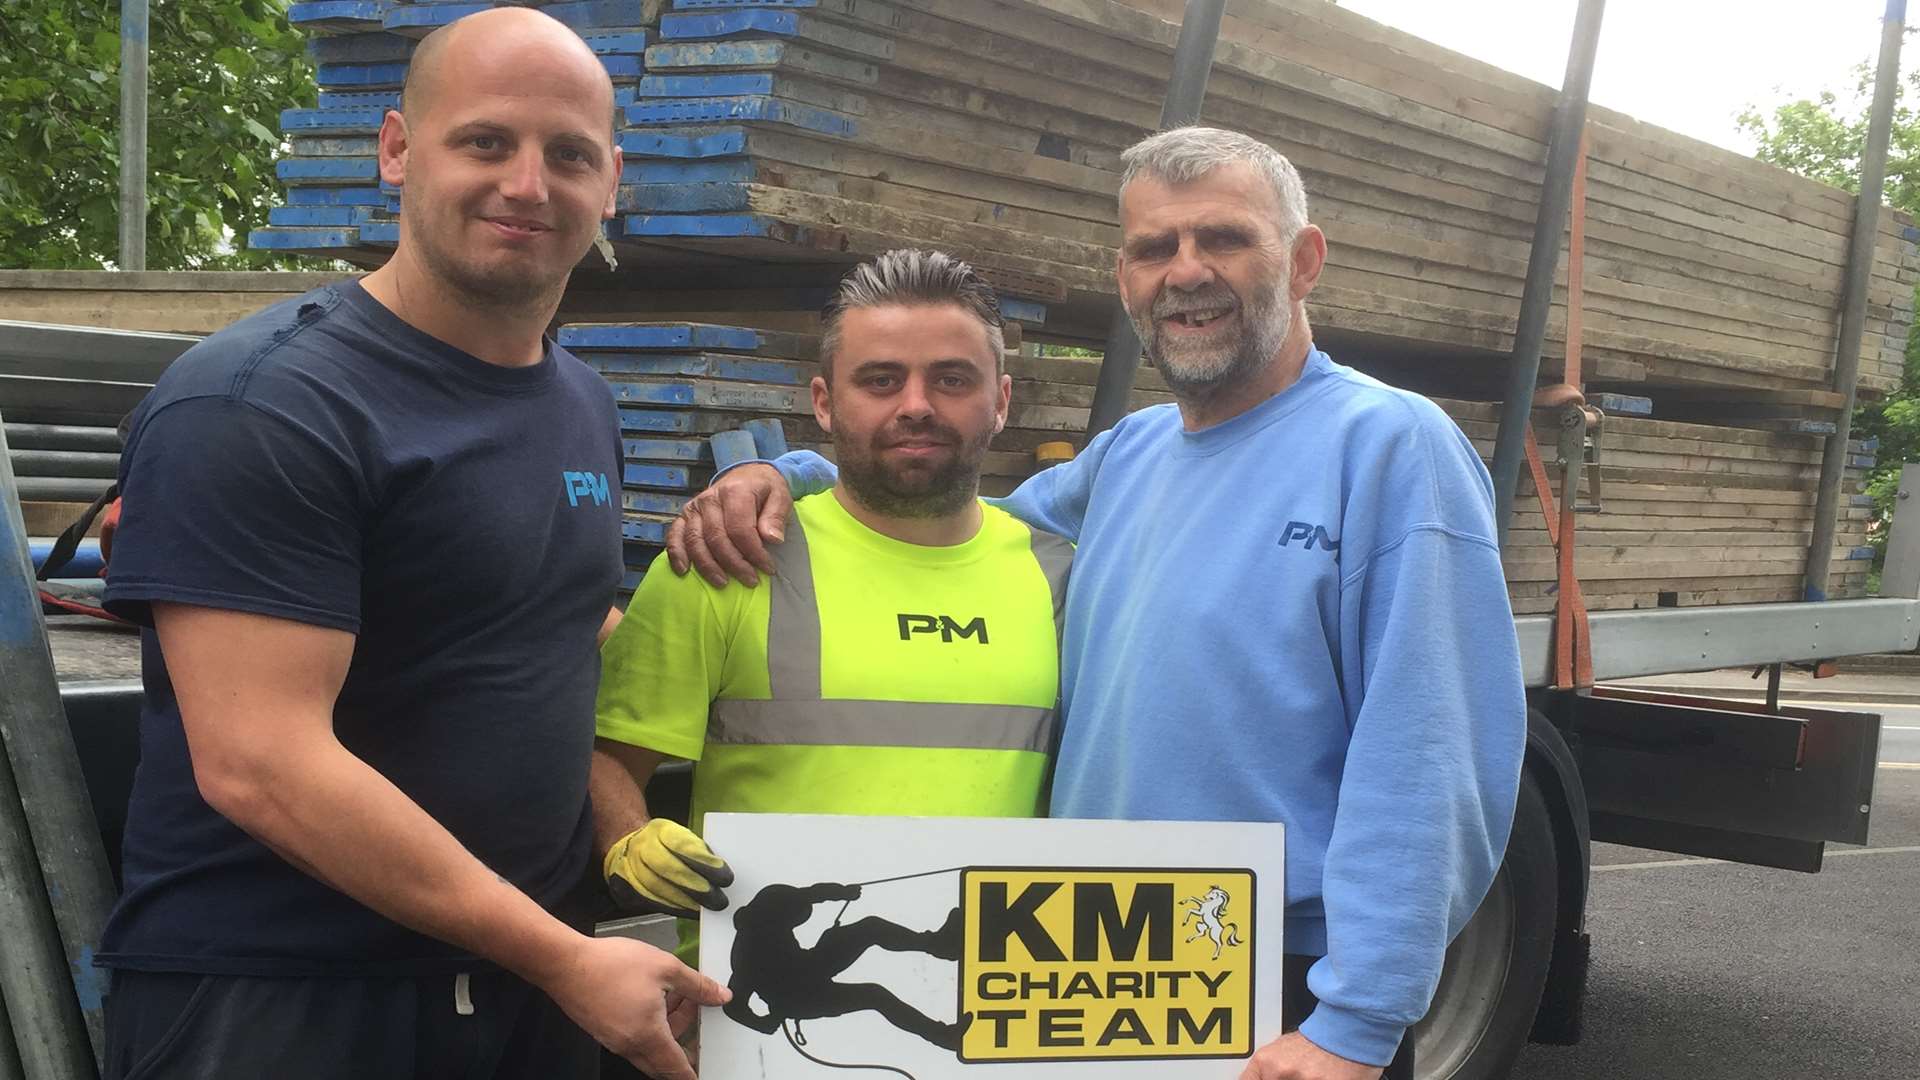 Chris Mosdell, Jay Marshall, John Walker of P&M Scaffolding show their support for the KM Maidstone Abseil Challenge.